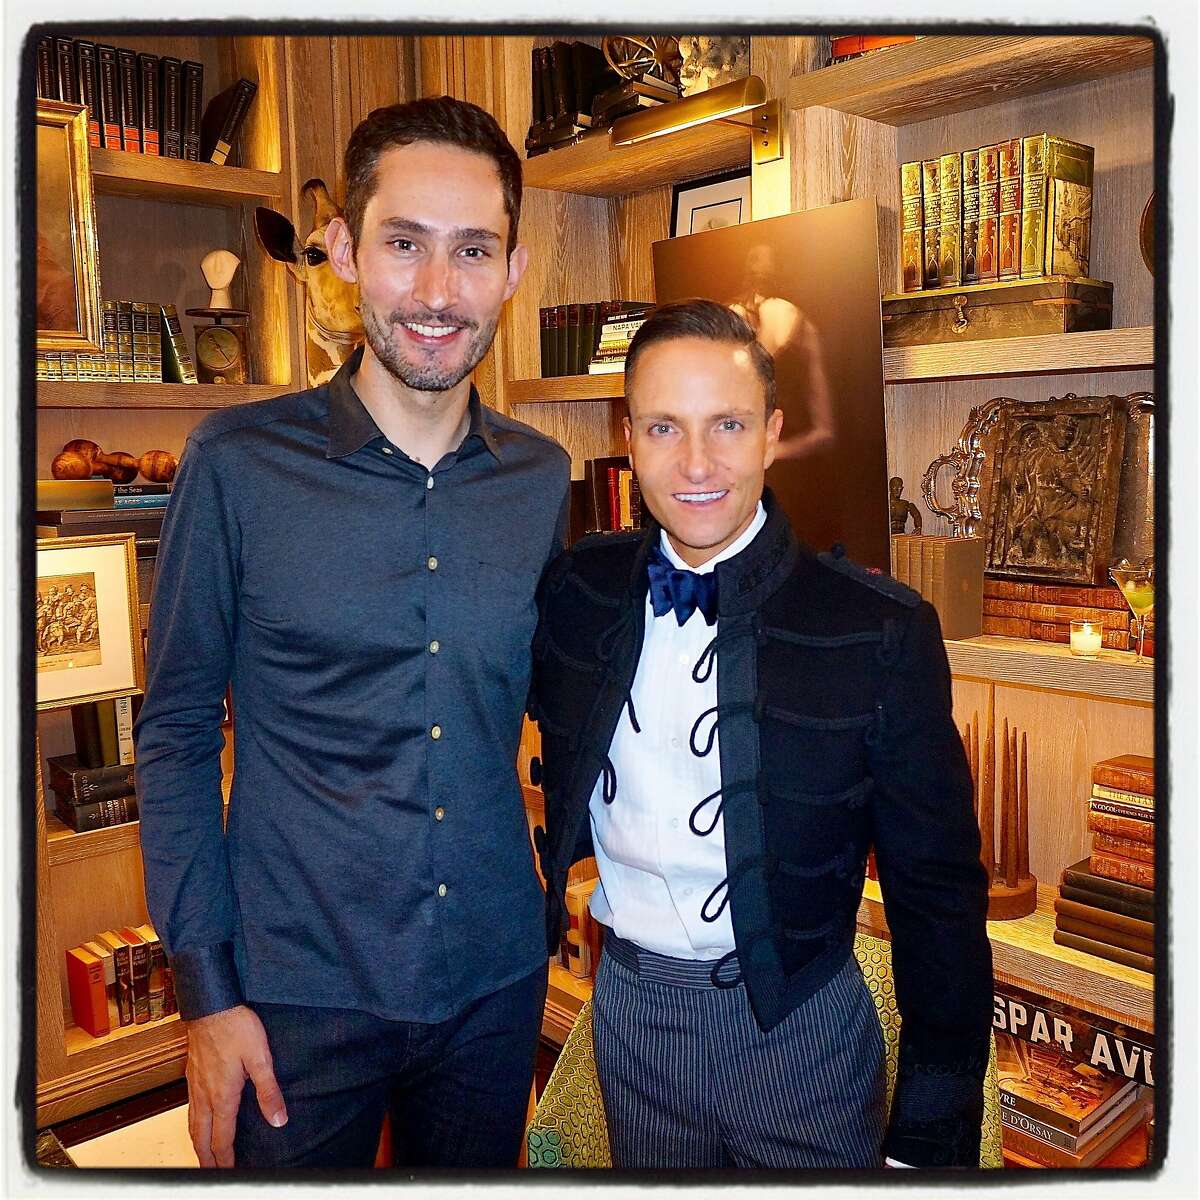 Instagram cofounder Kevin Systrom (left) cohosted a book launch party for designer Ken Fulk at The Harrison. Oct 2016.